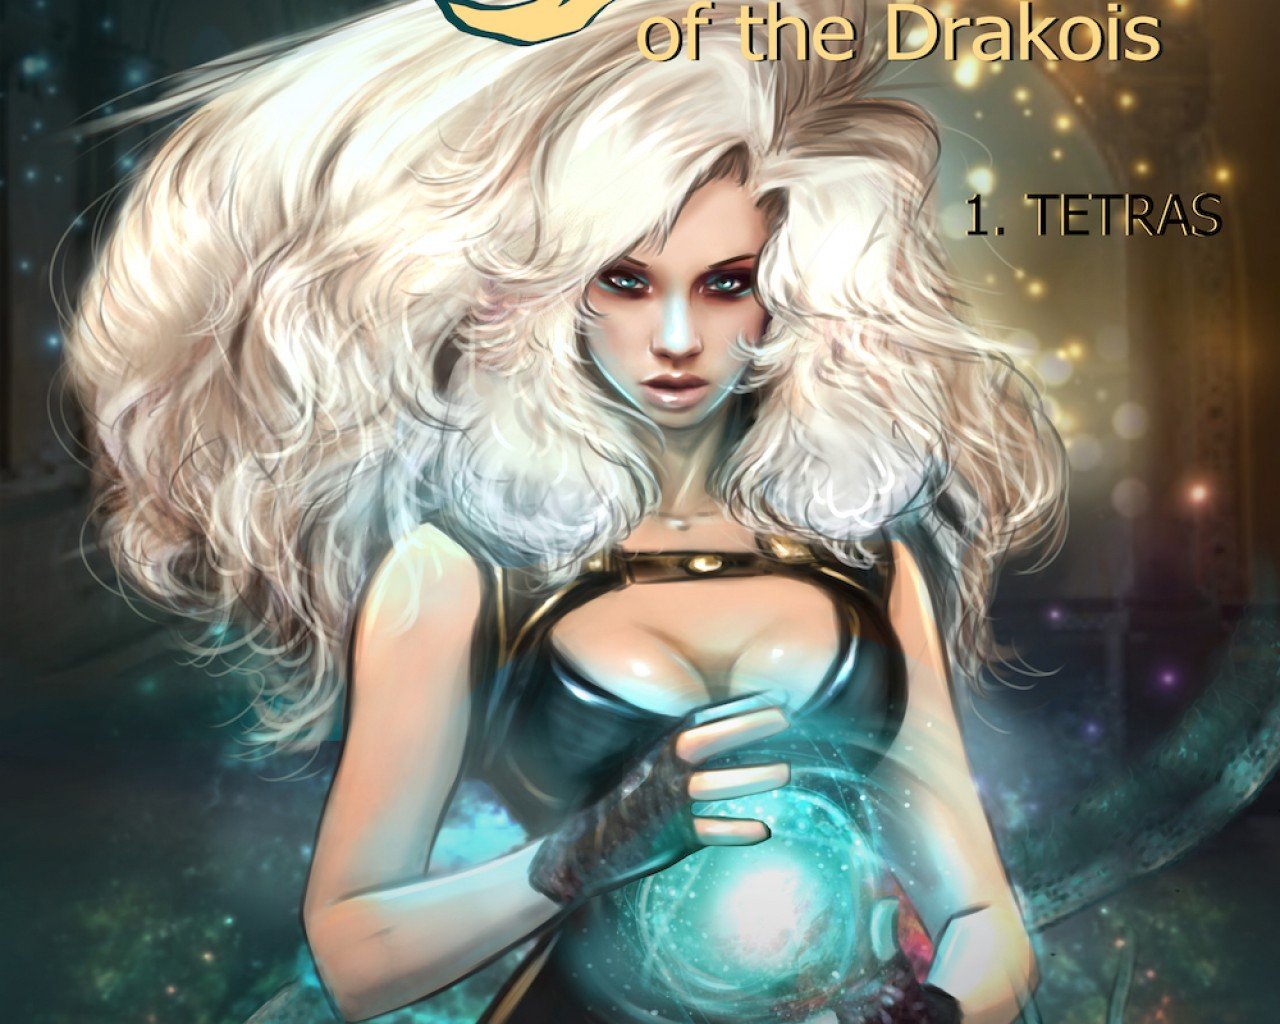 Poster Image for Lys of the Drakois